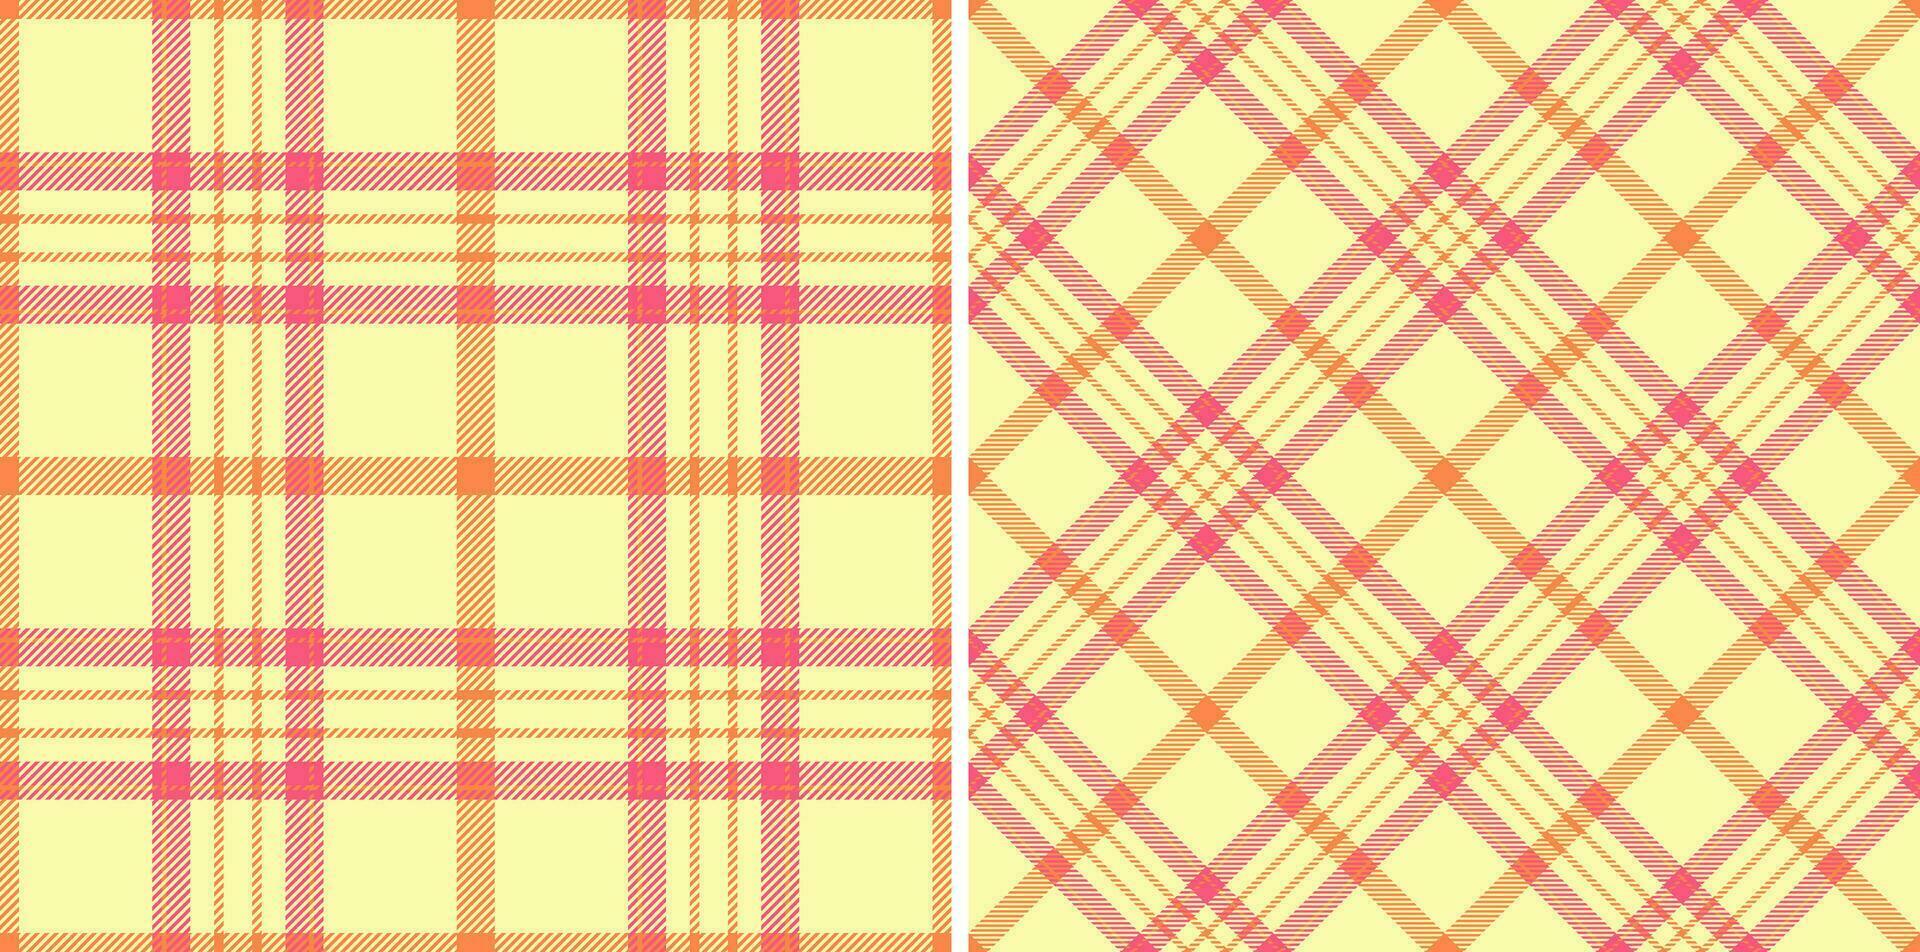 Tartan pattern background of fabric textile seamless with a check plaid texture vector. vector